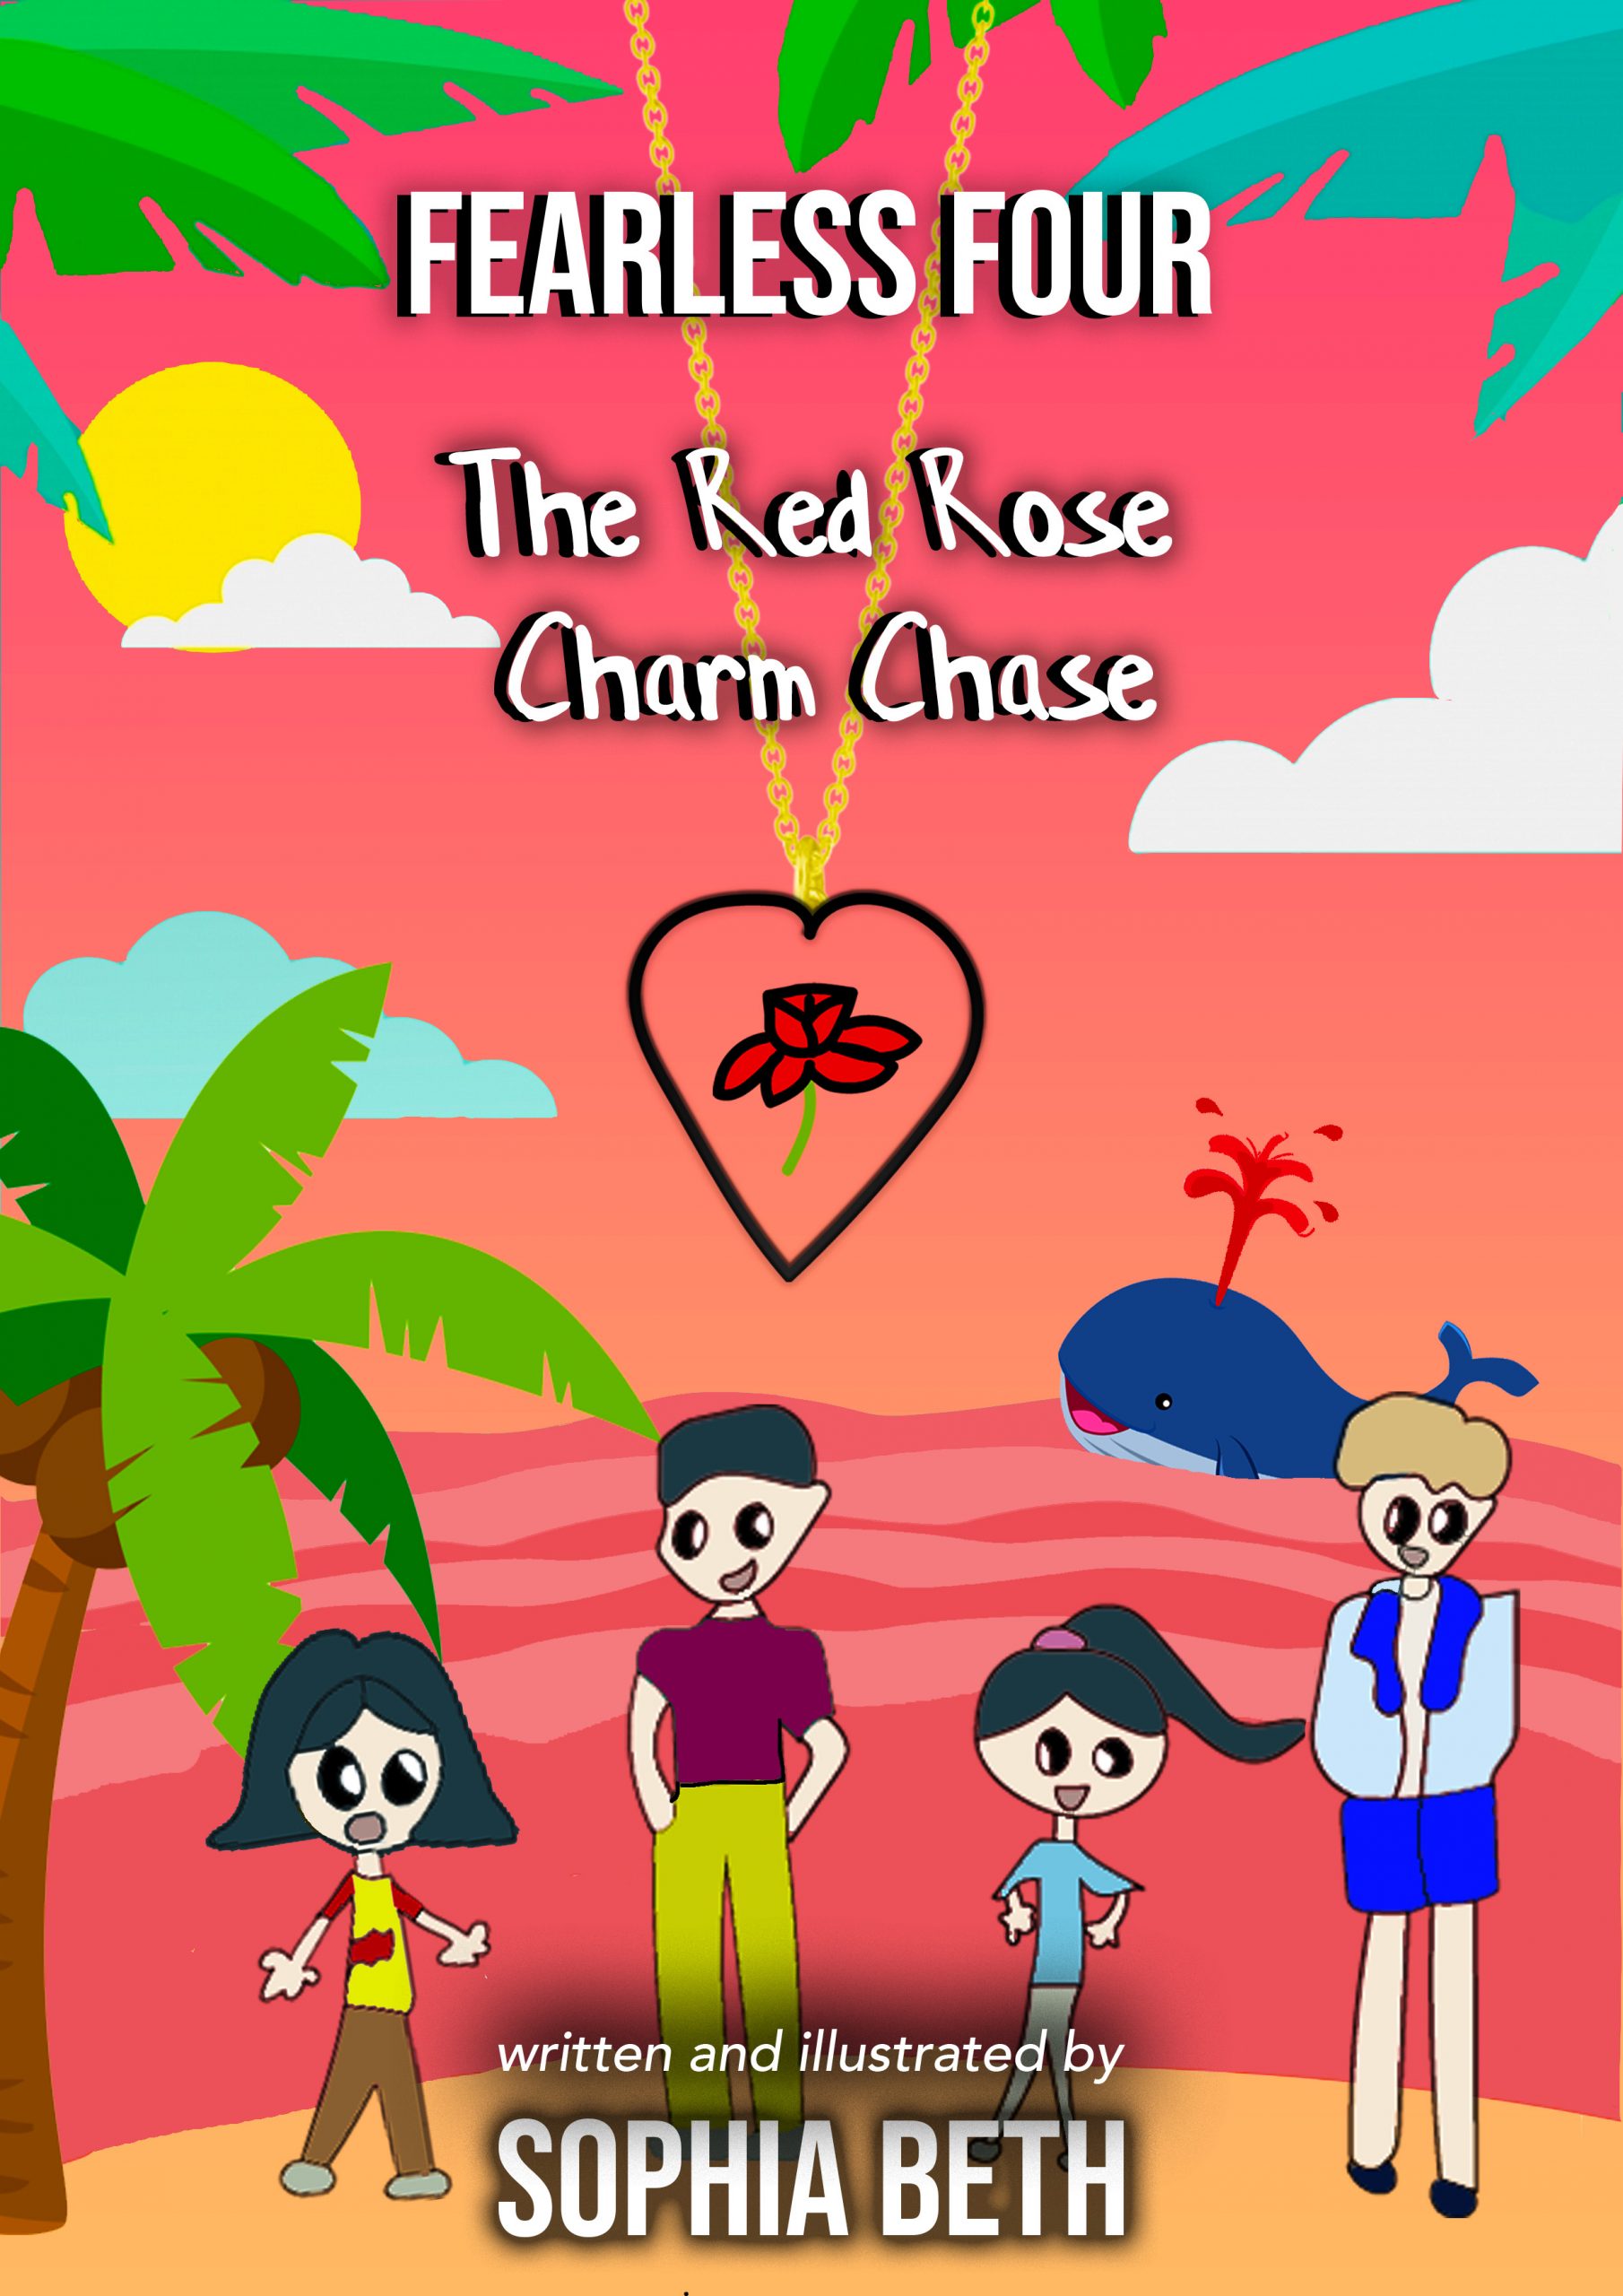 Fearless Four - The Red Rose Charm Chase